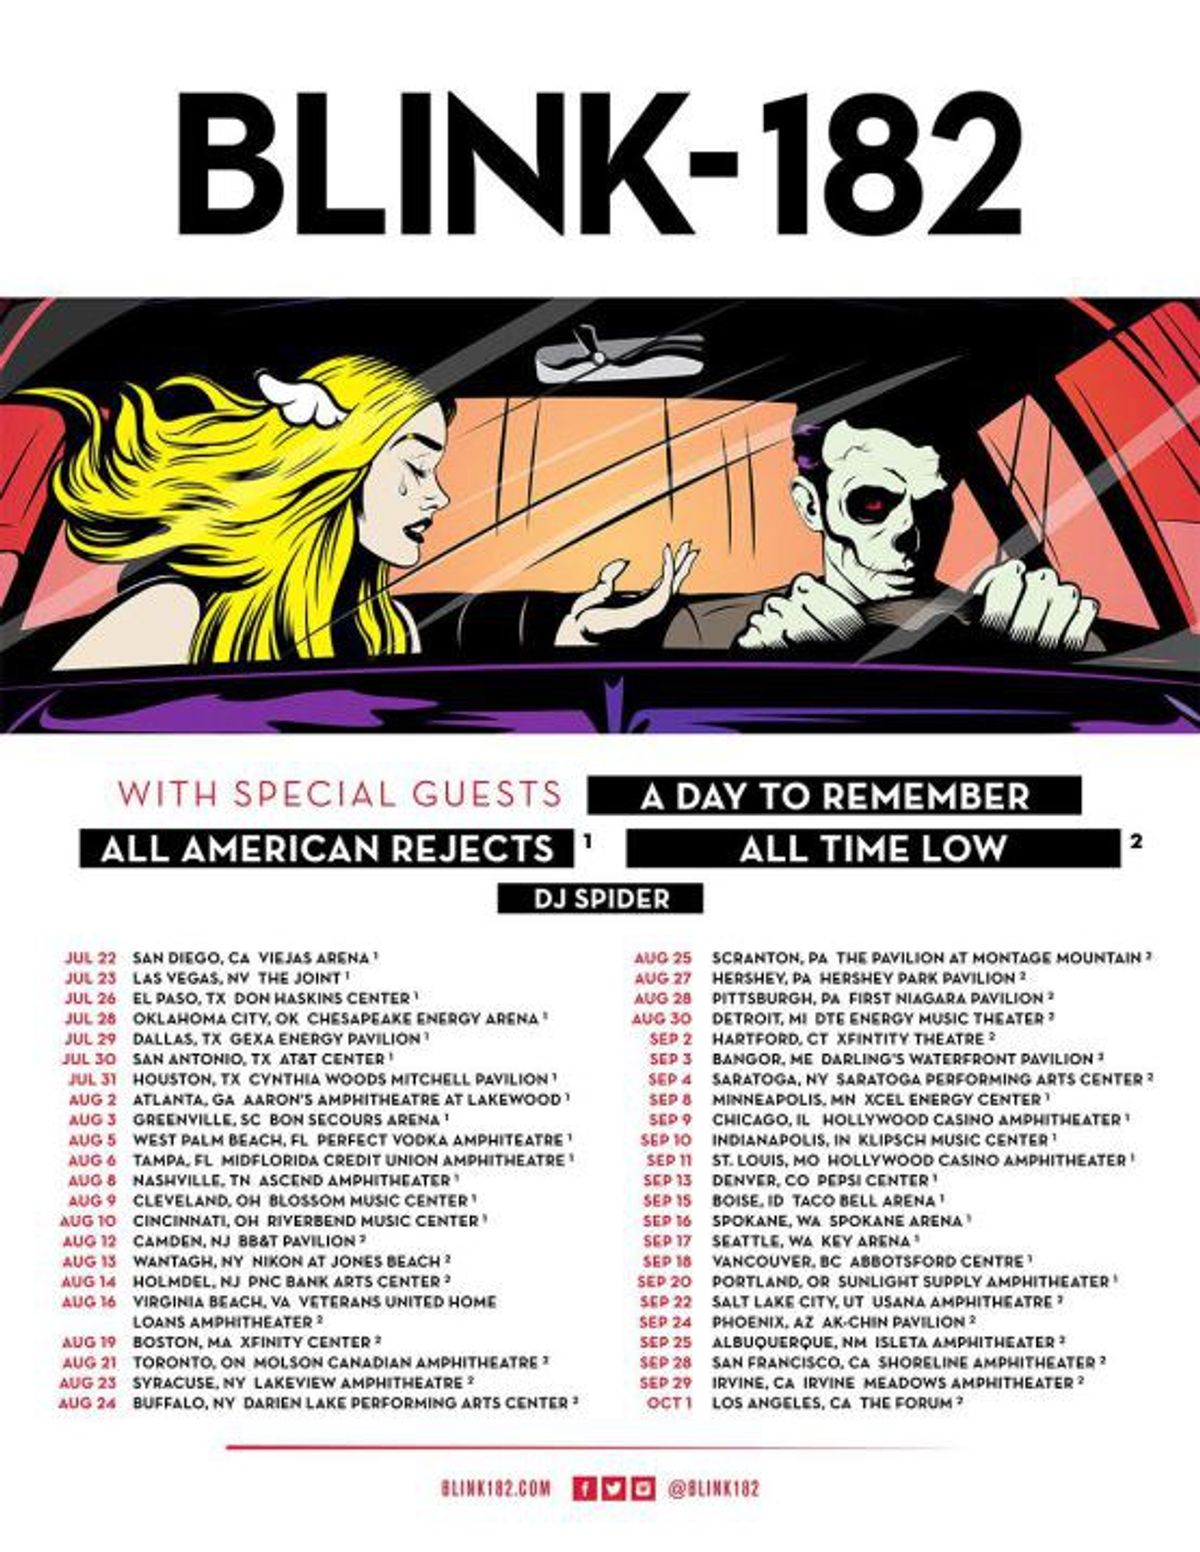 Blink-182 Is Back And They're Touring This Summer